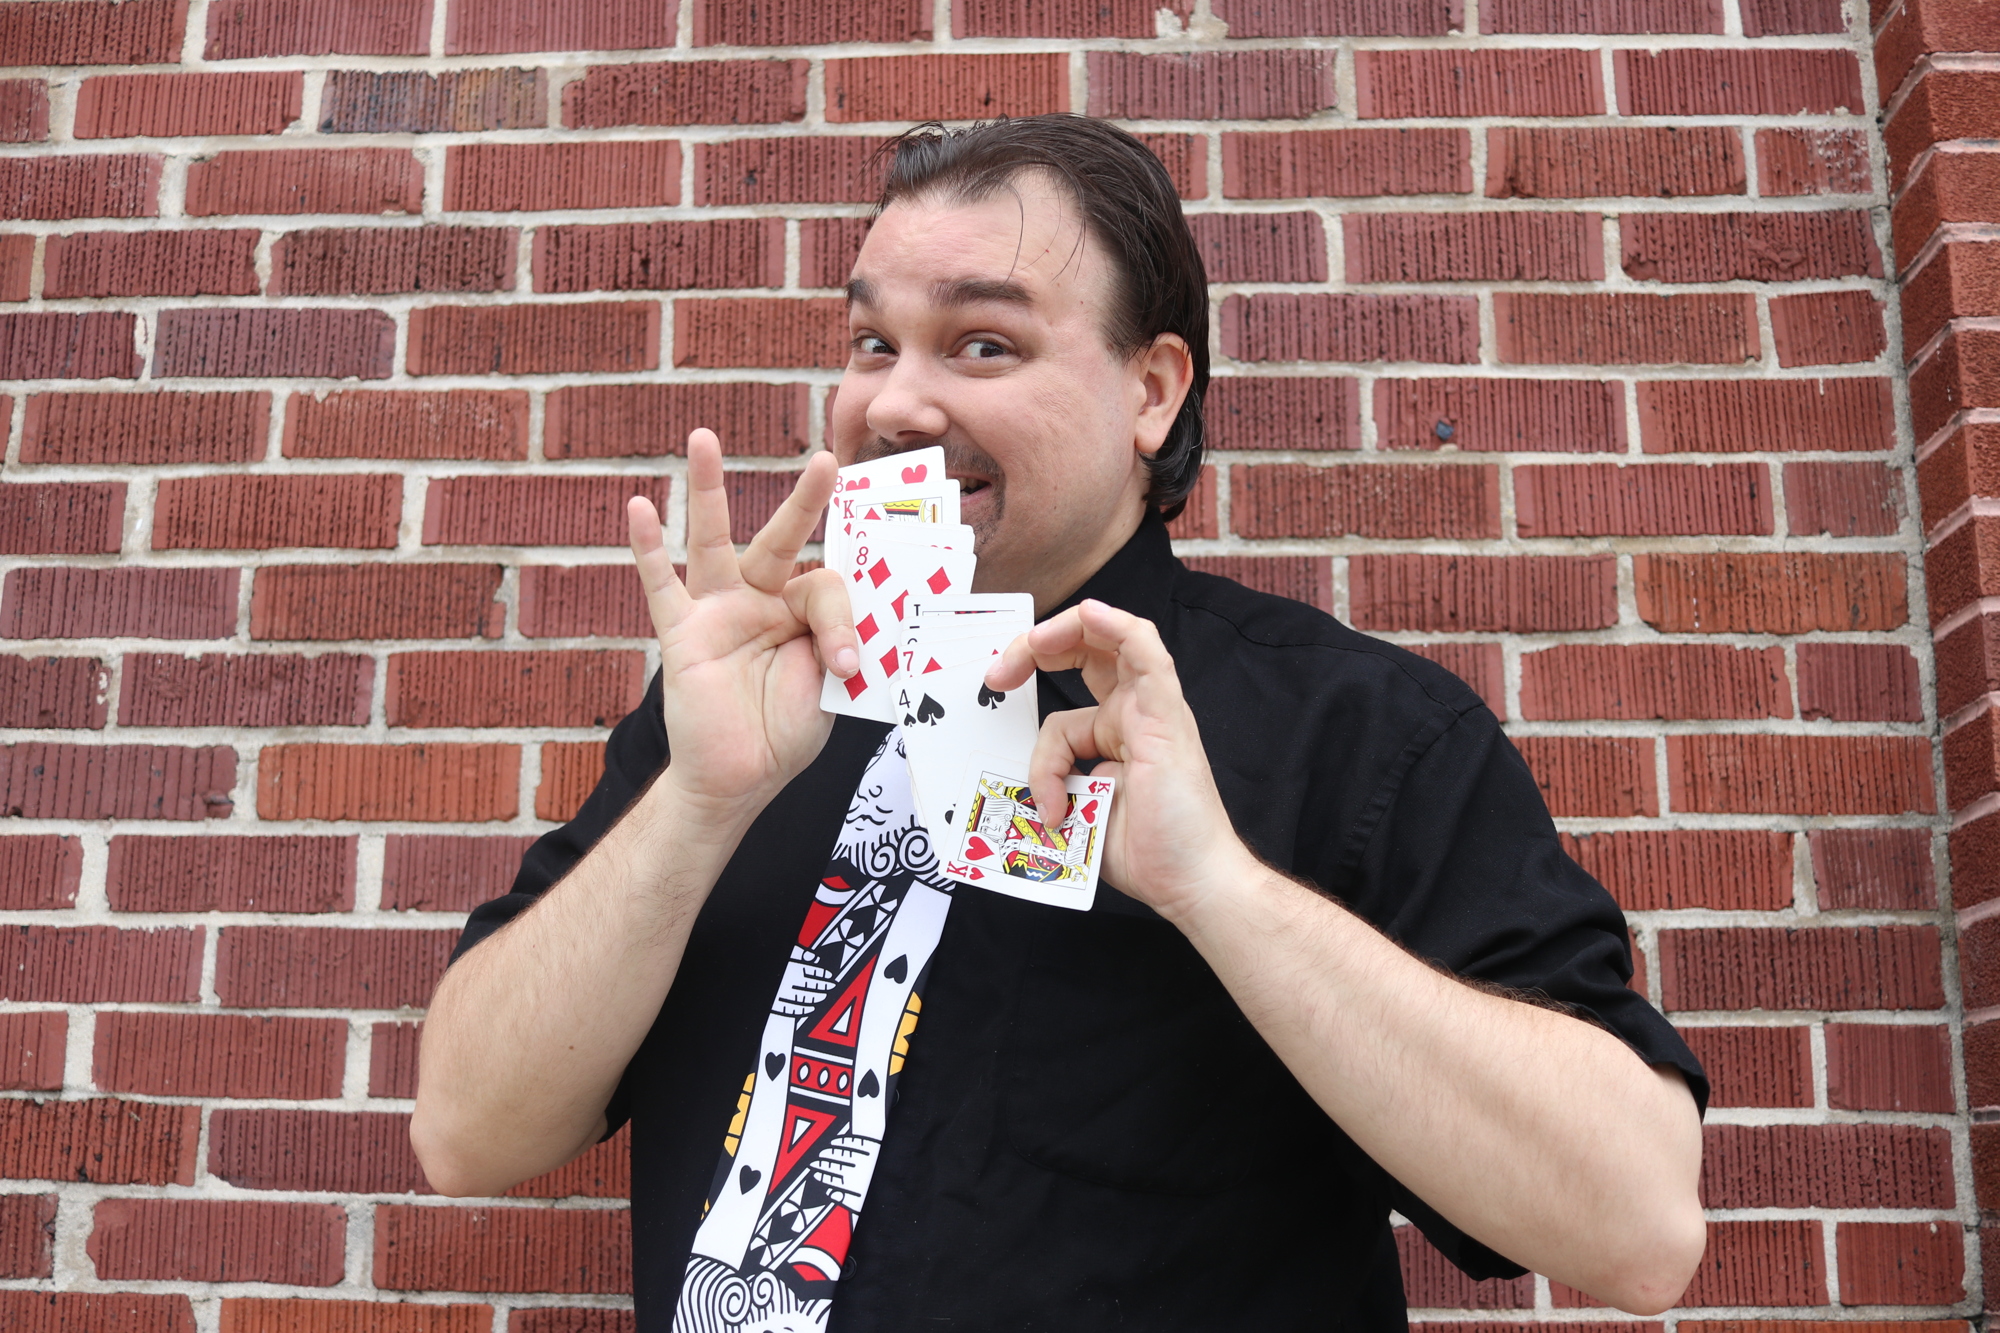 Michael Matson began honing his craft in magic at age 5 as a way to help cope with his father’s battle with Hodgkin’s lymphoma. After beating the cancer, his father taught him how to shuffle cards, which led him to try card tricks.